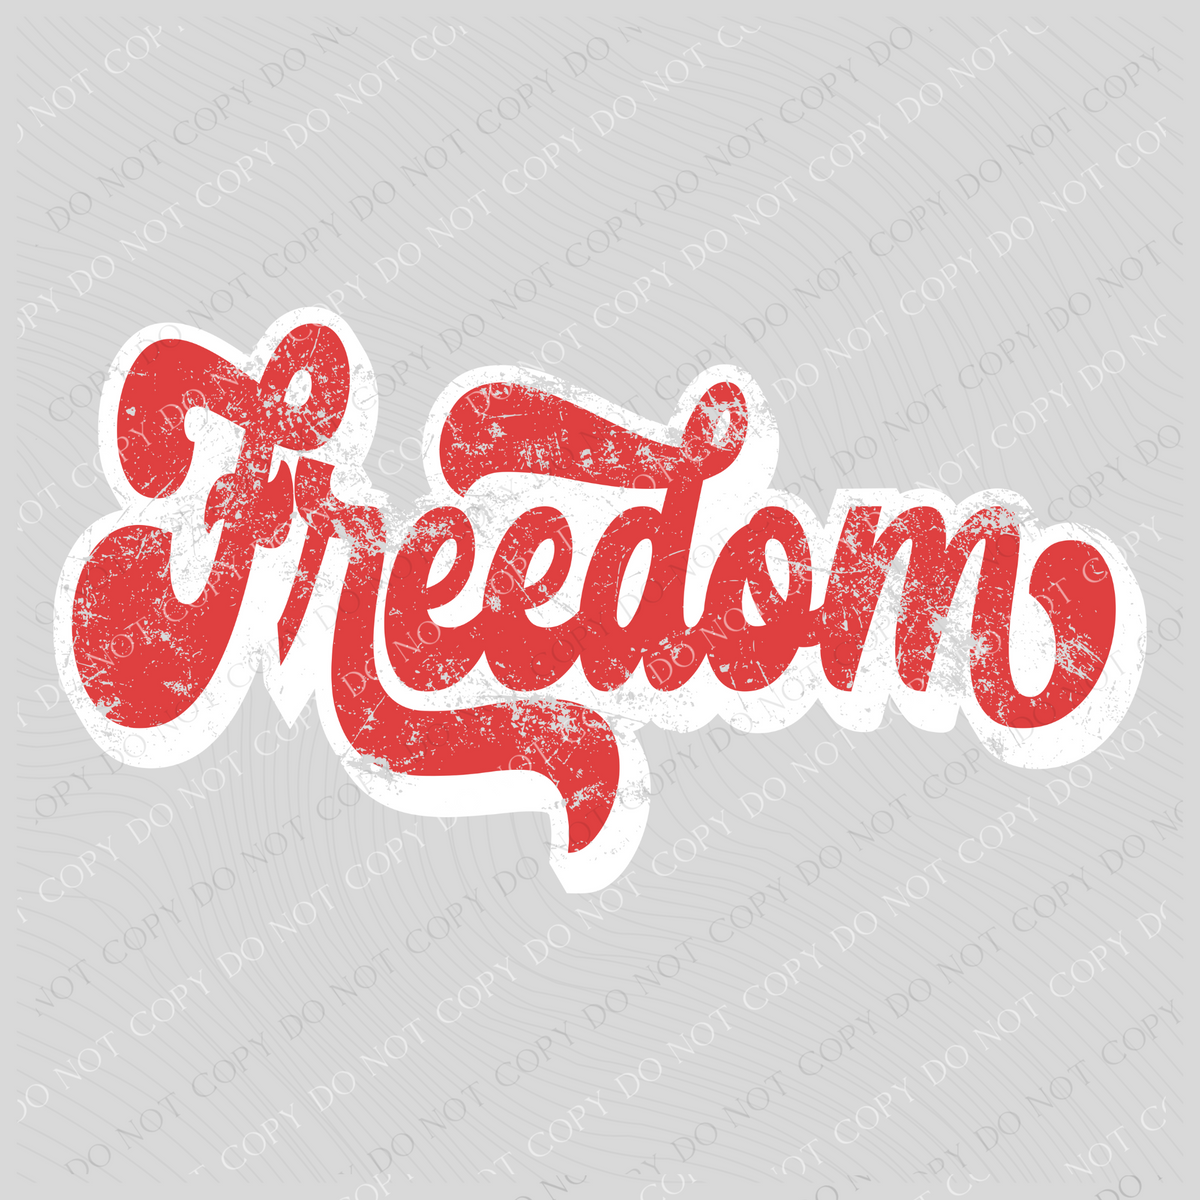 Freedom Red & White Retro Shadow Distressed Design PNG, Digital Download